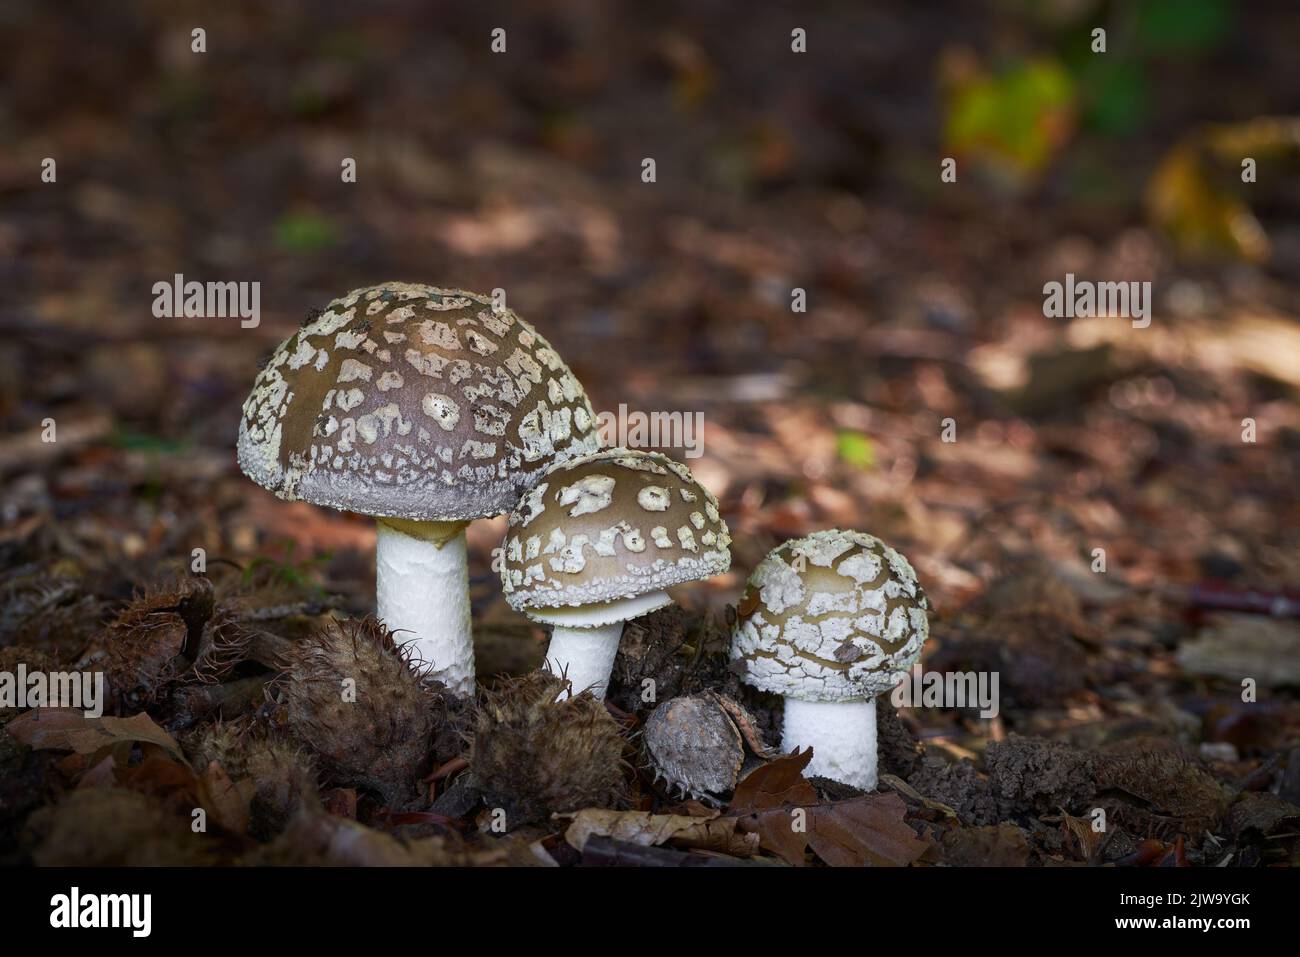 Amanita excelsa is edible mushroom grows in forests Central Europe. Stock Photo